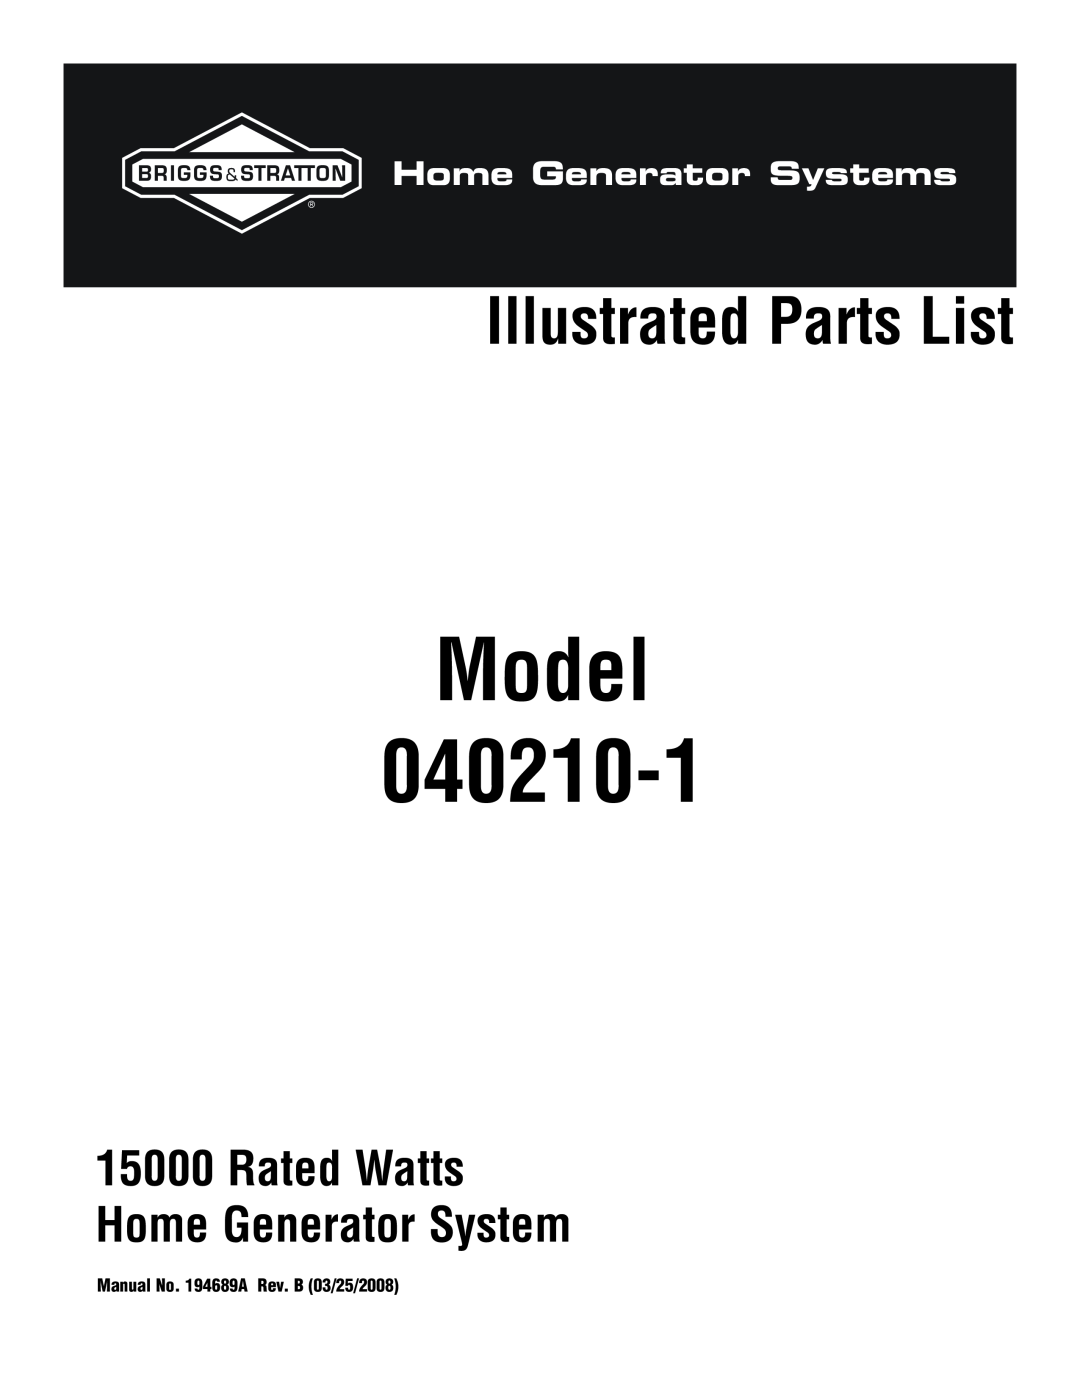 Briggs & Stratton 040210-1 manual Model, Illustrated Parts List, Rated Watts Home Generator System, Home Generator Systems 